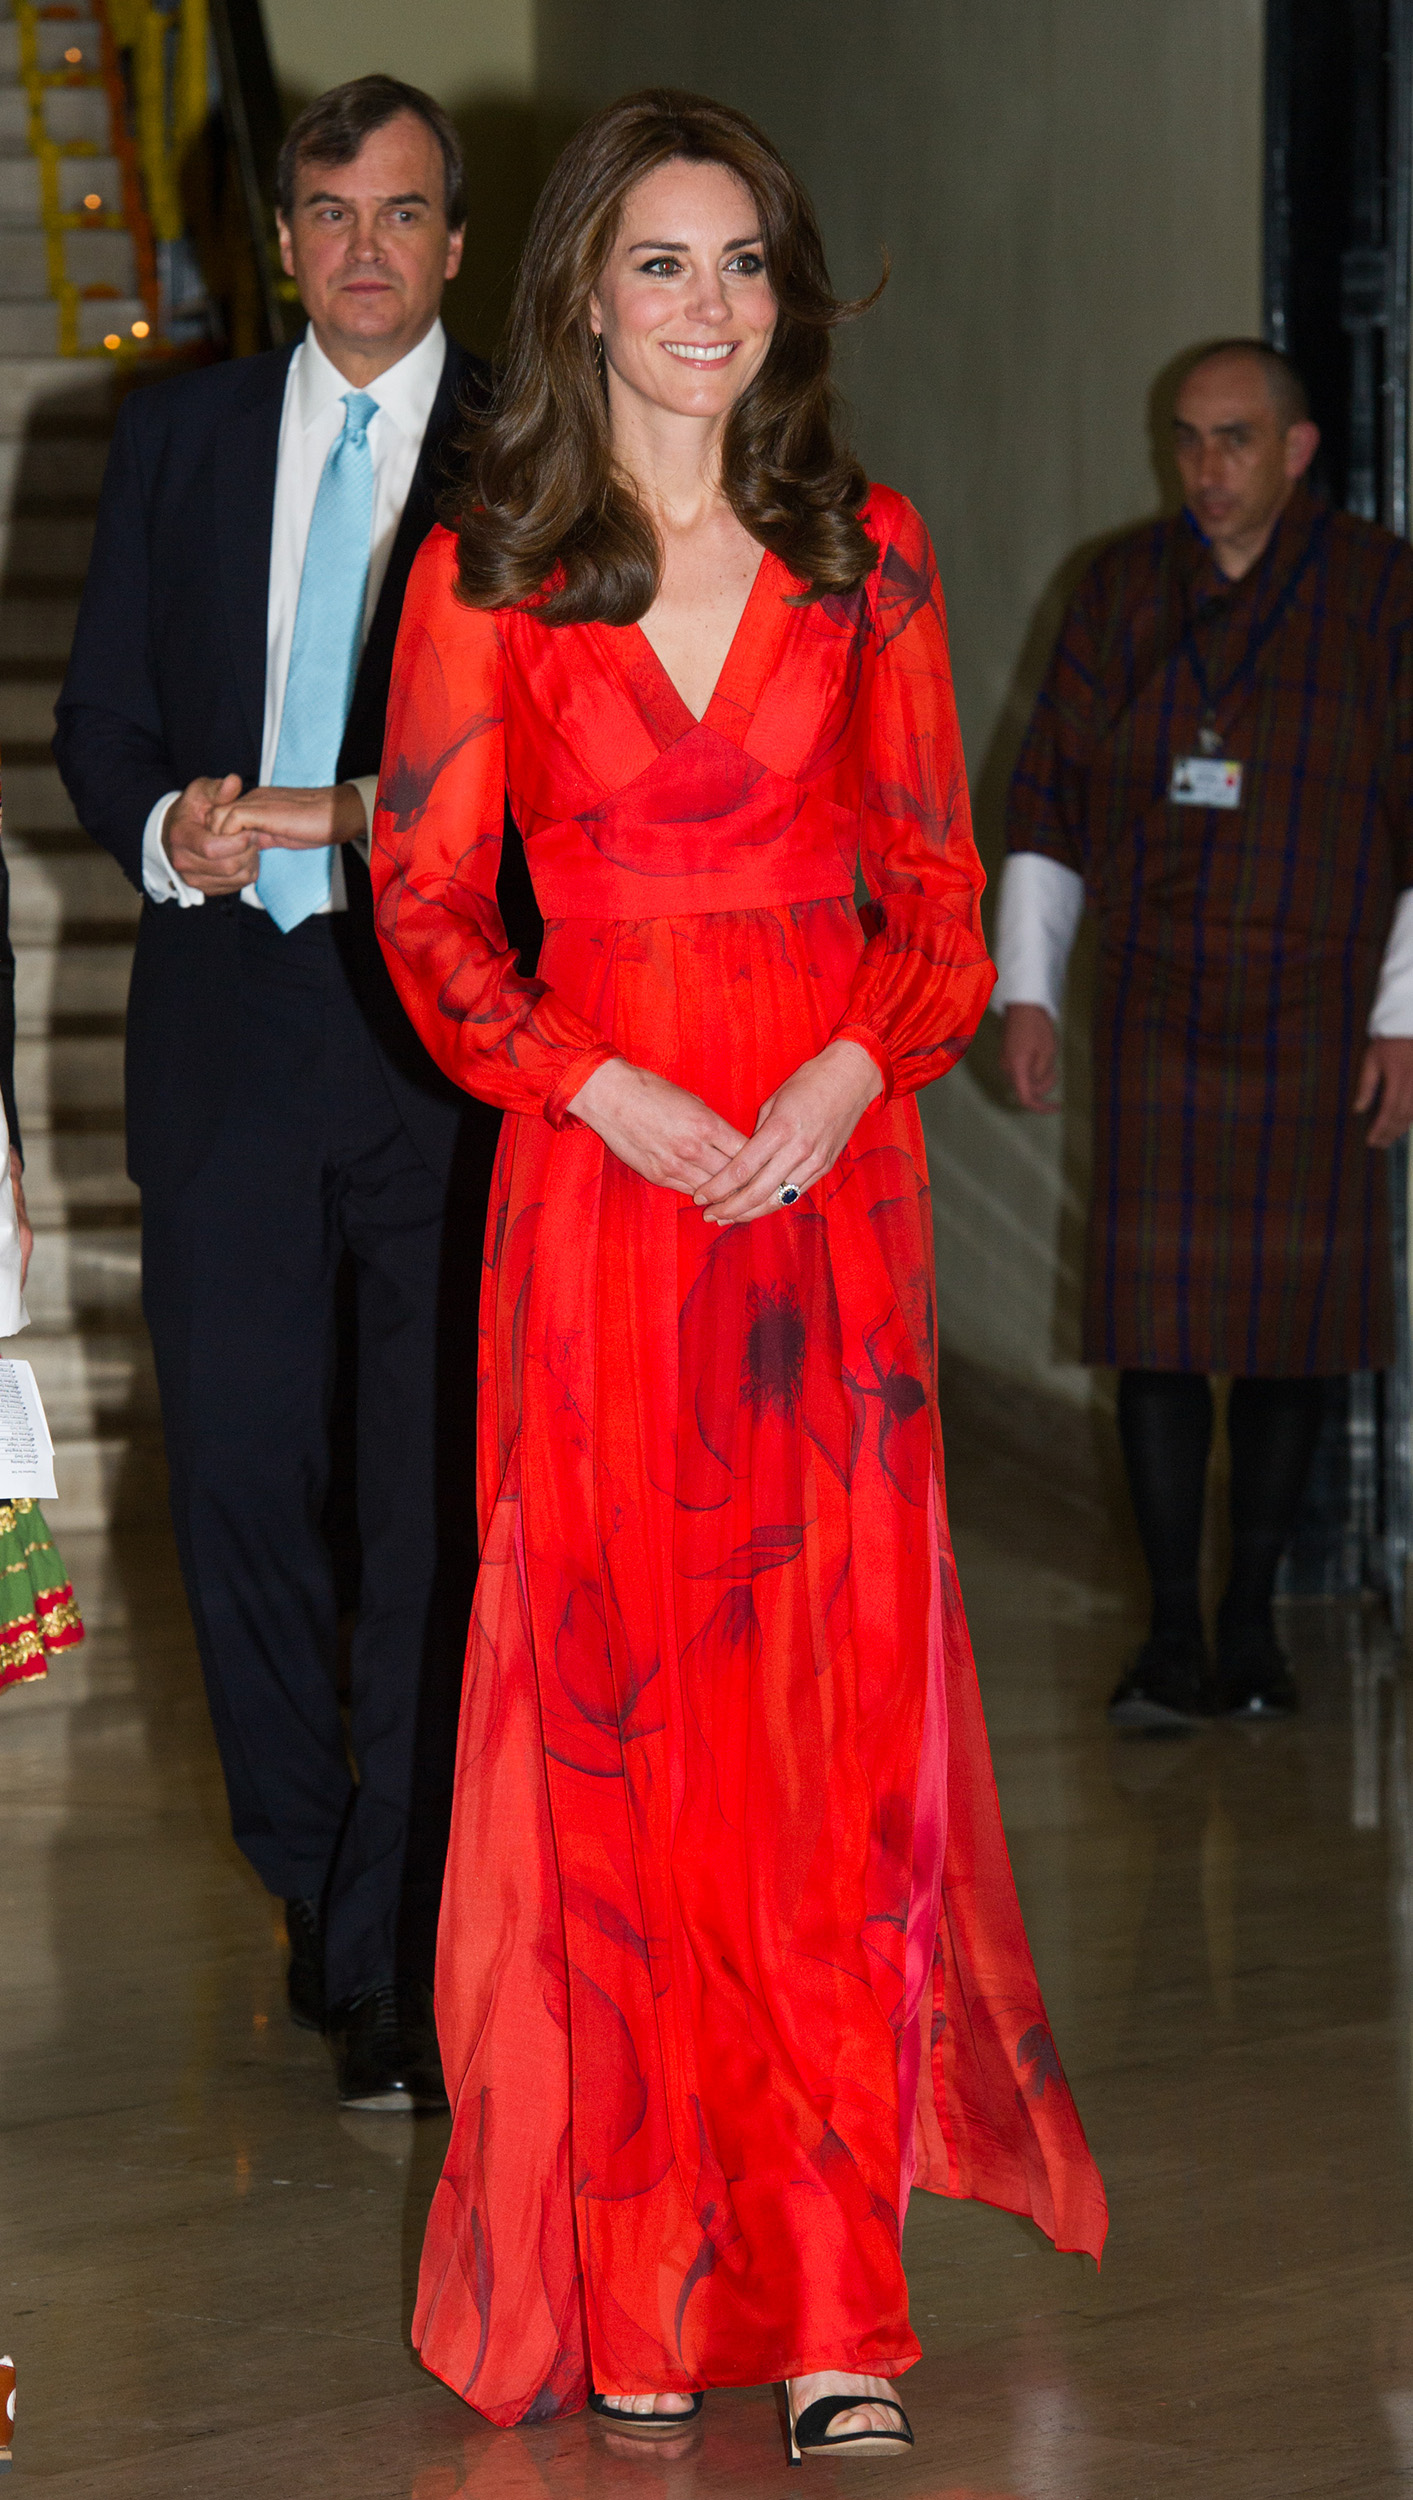 Catherine, Duchess of Cambridge attends a reception for British nationals in Bhutan and Bhutanese people with strong links to the UK on April 15, 2016.